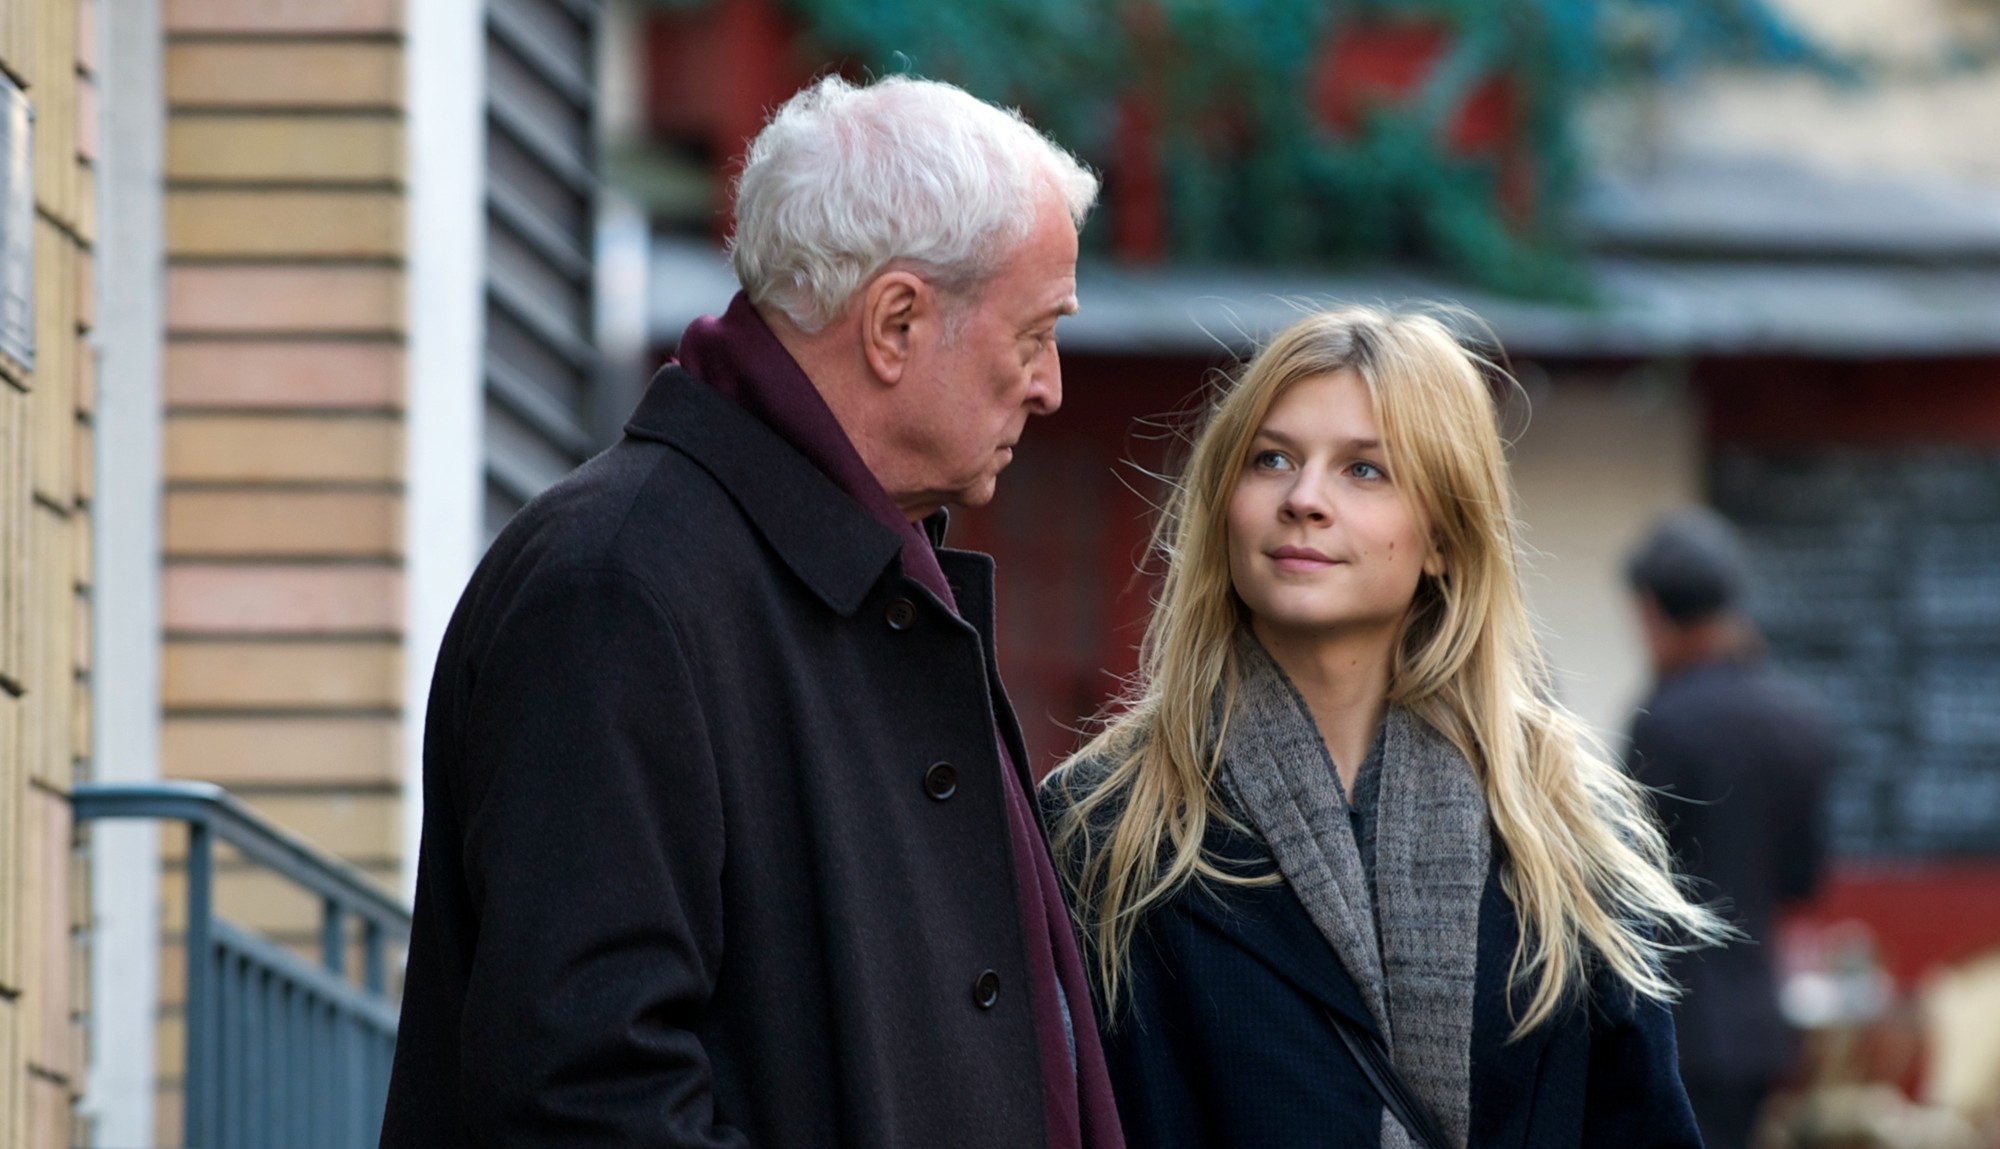 Michael Caine stars as Matthew Morgan and Clemence Poesy stars as Pauline Laubie in Image Entertainment's Last Love (2013)